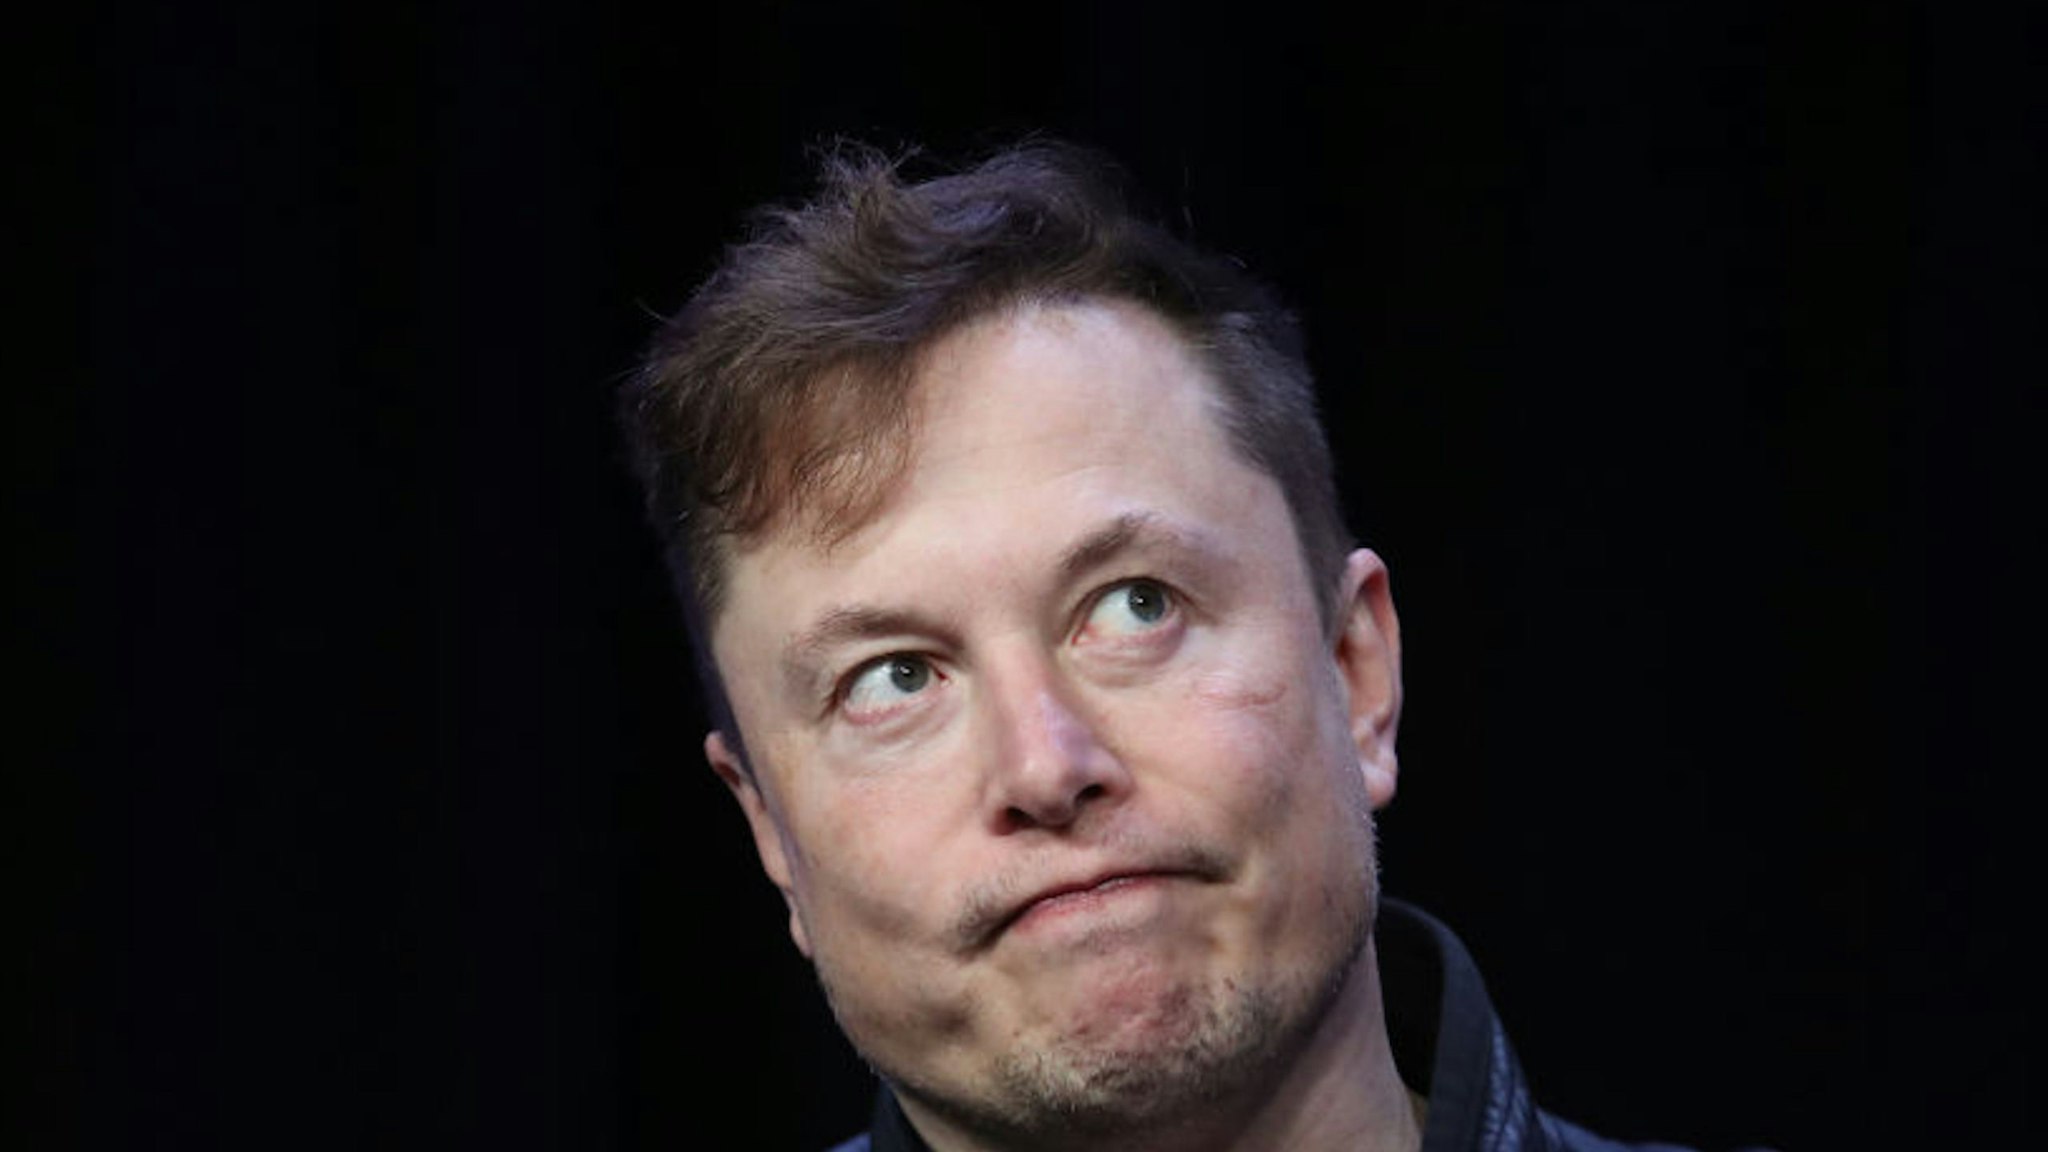 WASHINGTON, DC - MARCH 09: Elon Musk, founder and chief engineer of SpaceX speaks at the 2020 Satellite Conference and Exhibition March 9, 2020 in Washington, DC. Musk answered a range of questions relating to SpaceX projects during his appearance at the conference.